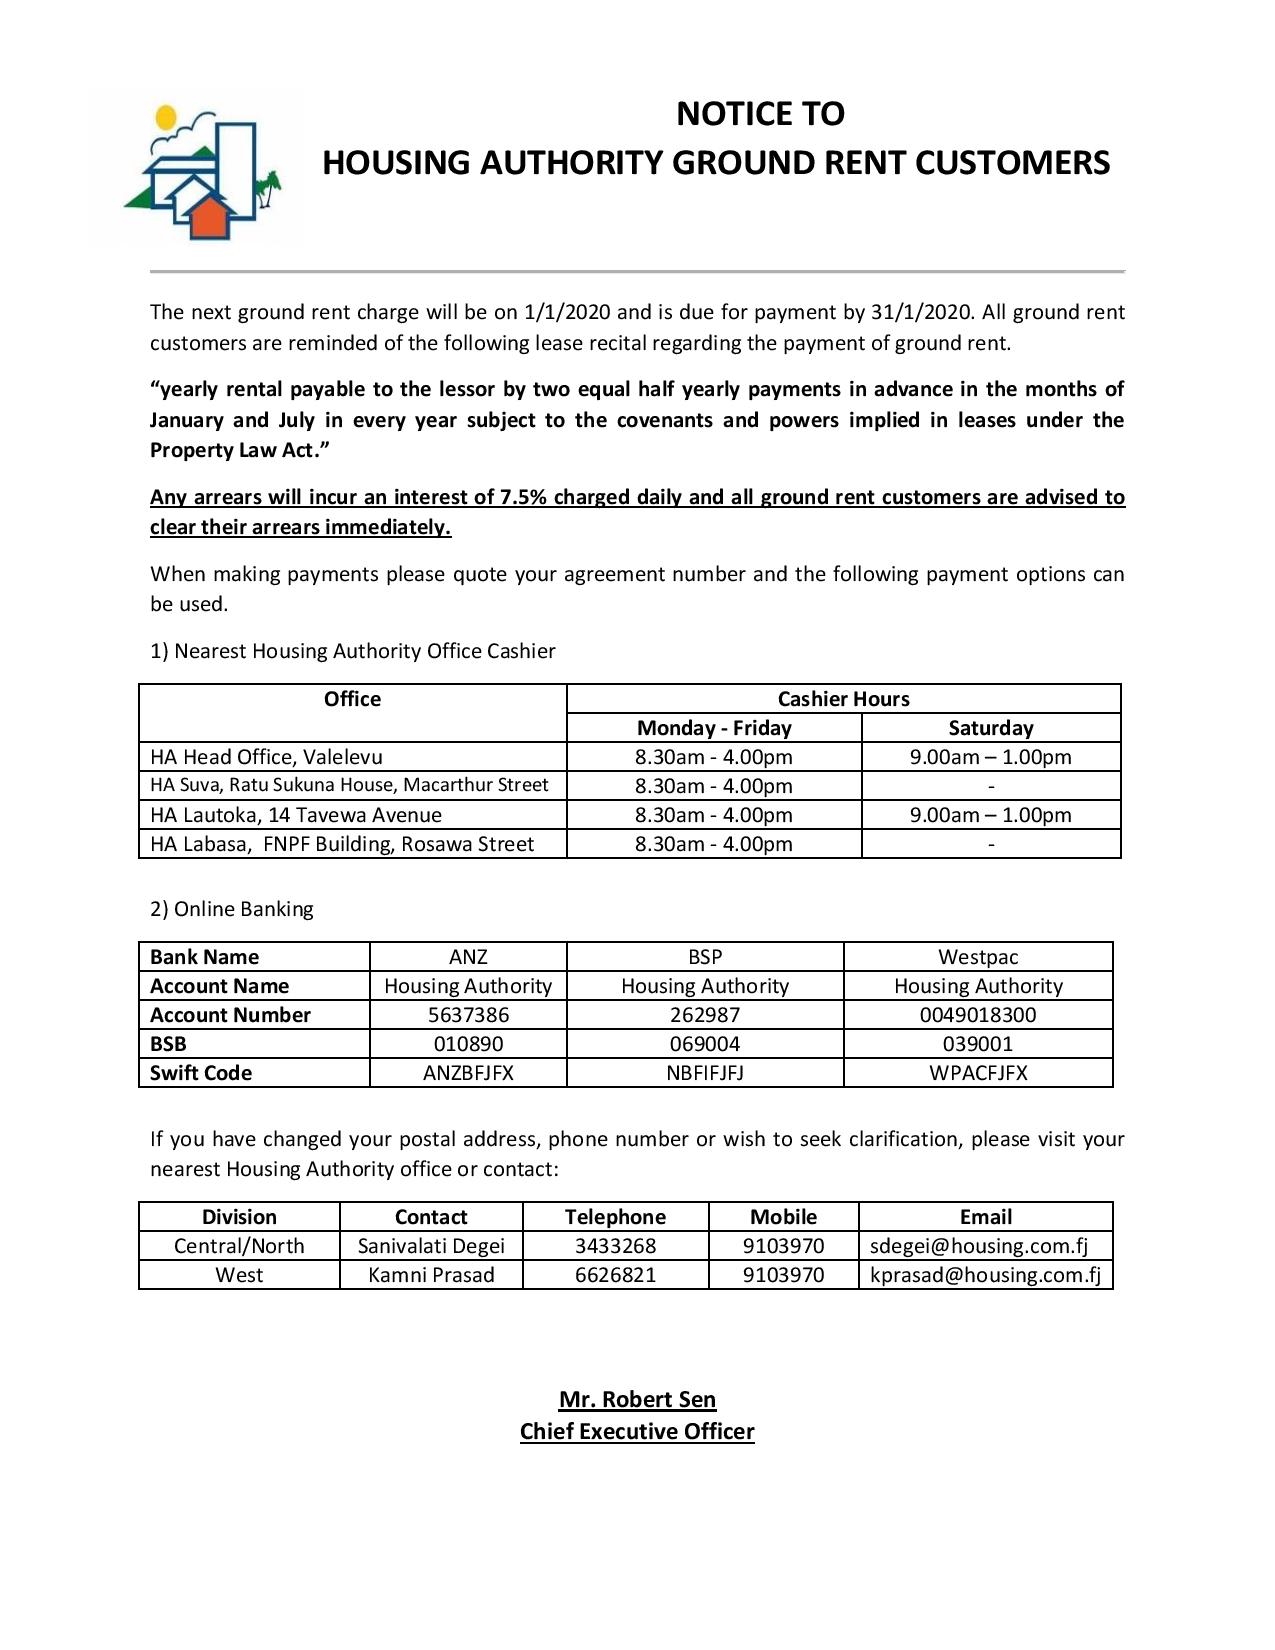 NOTICE TO GR CUSTOMERS 2019-page-001 (1)